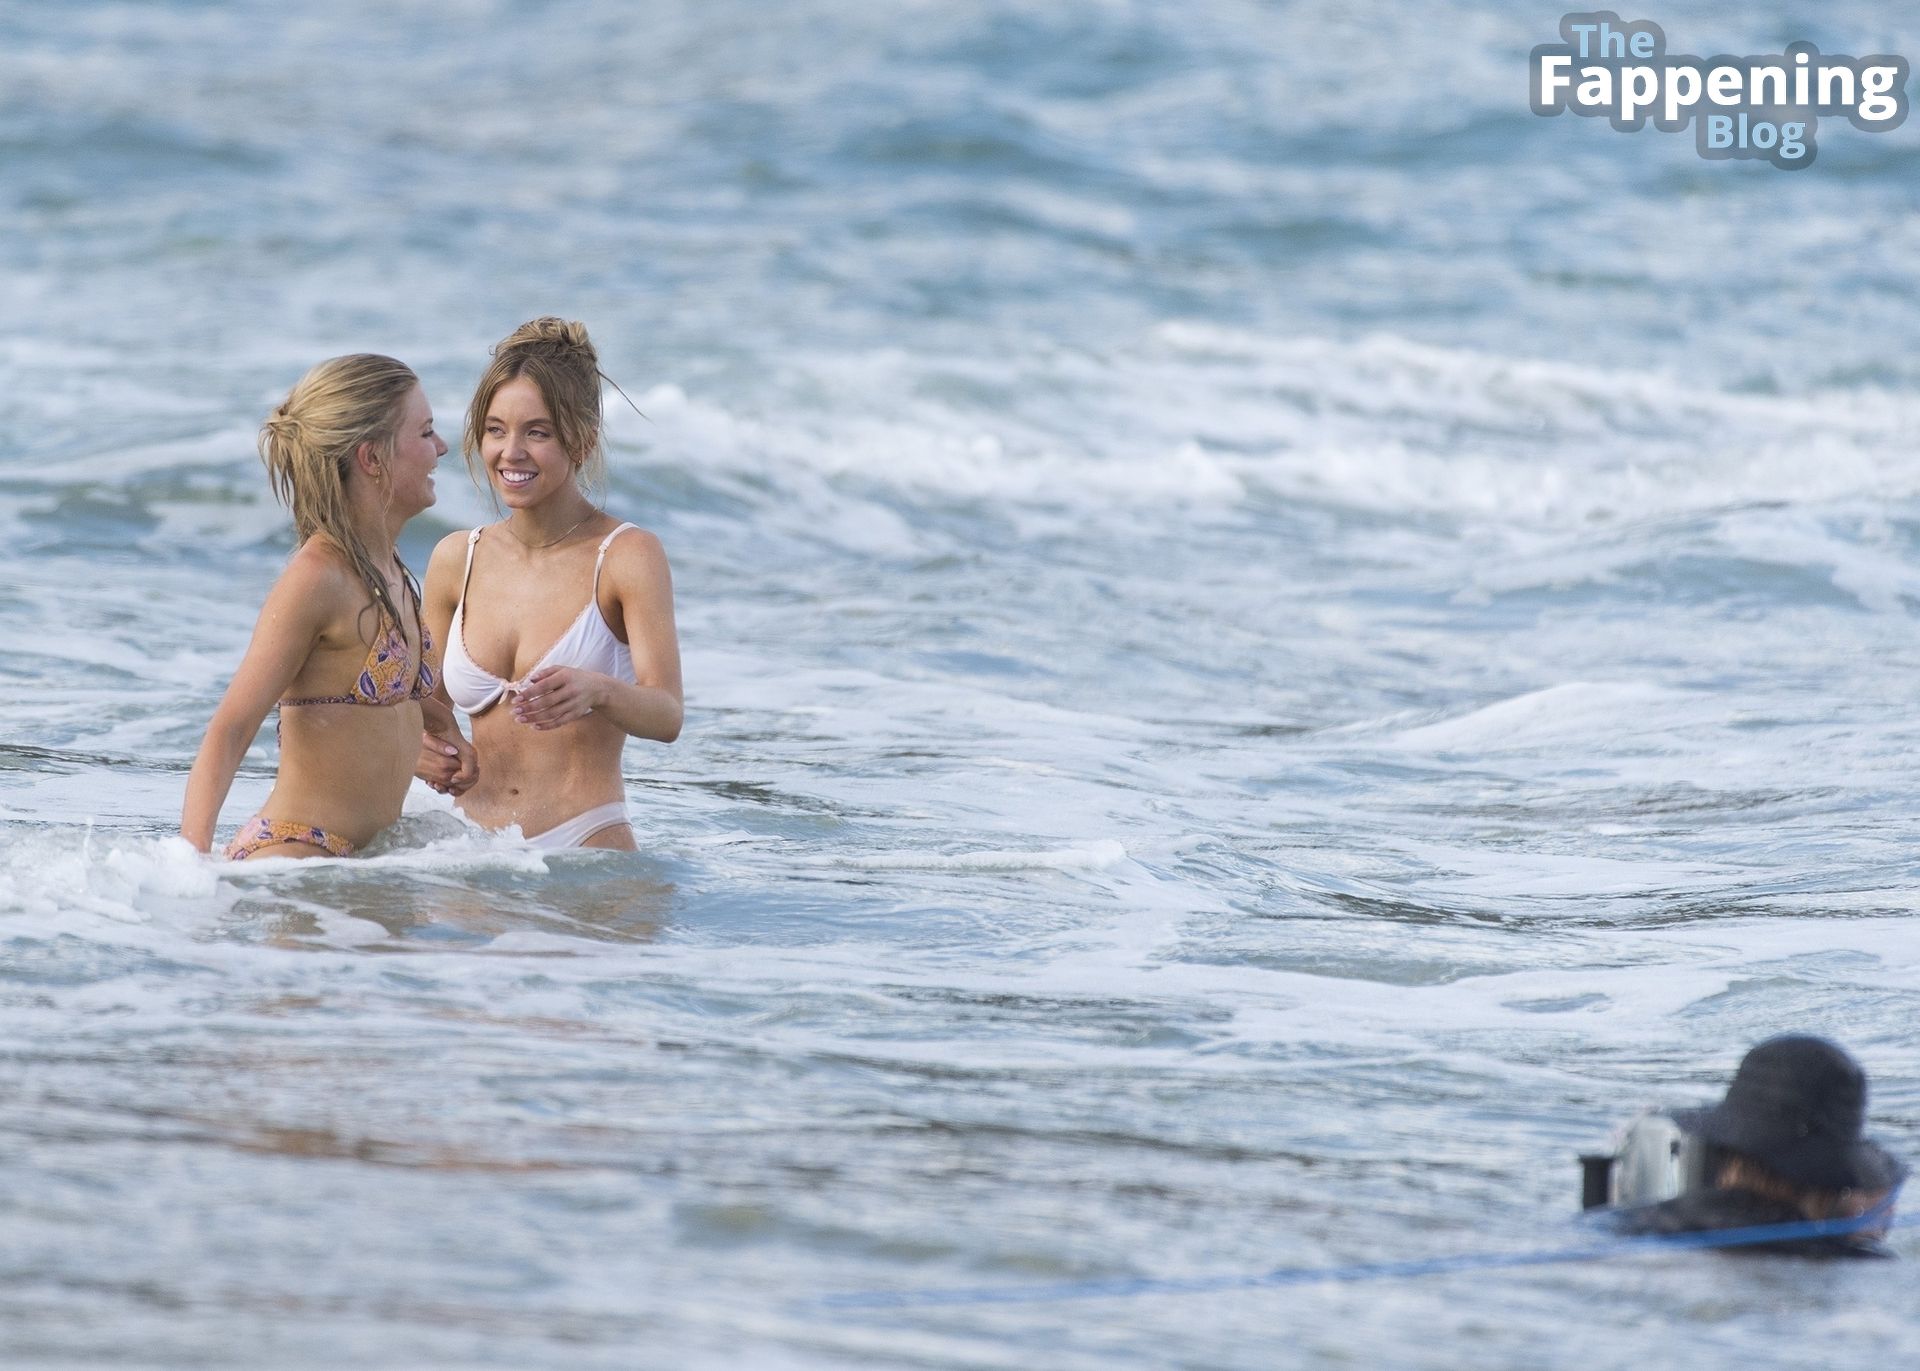 Sydney Sweeney &amp; Glen Powell Show of Their Beach Bodies While Filming in Australia (92 Photos)